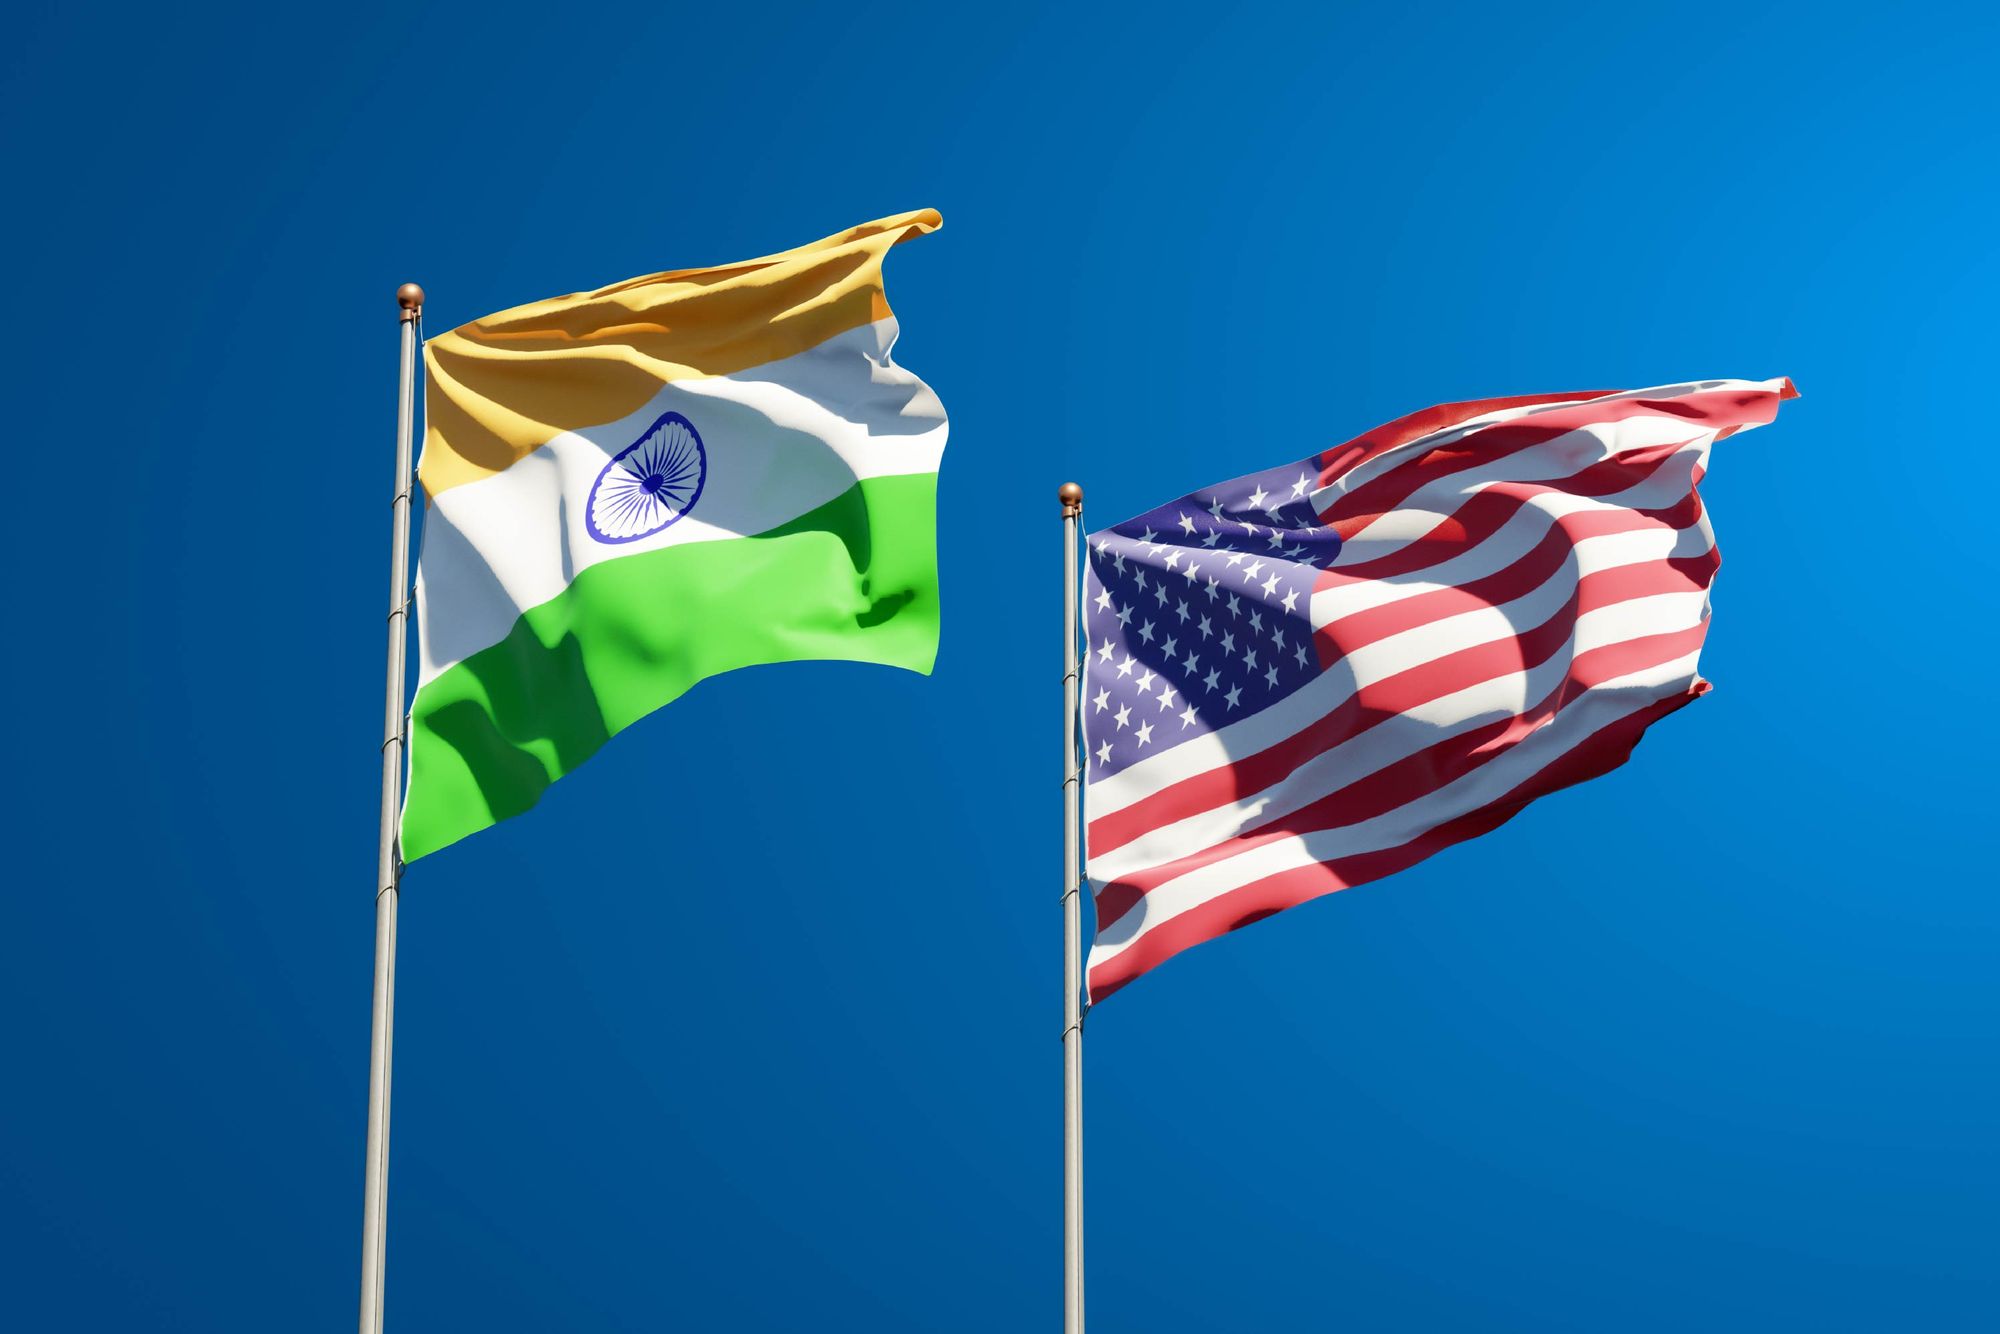 The US and India are also among the countries that could accept BTC as legal tender